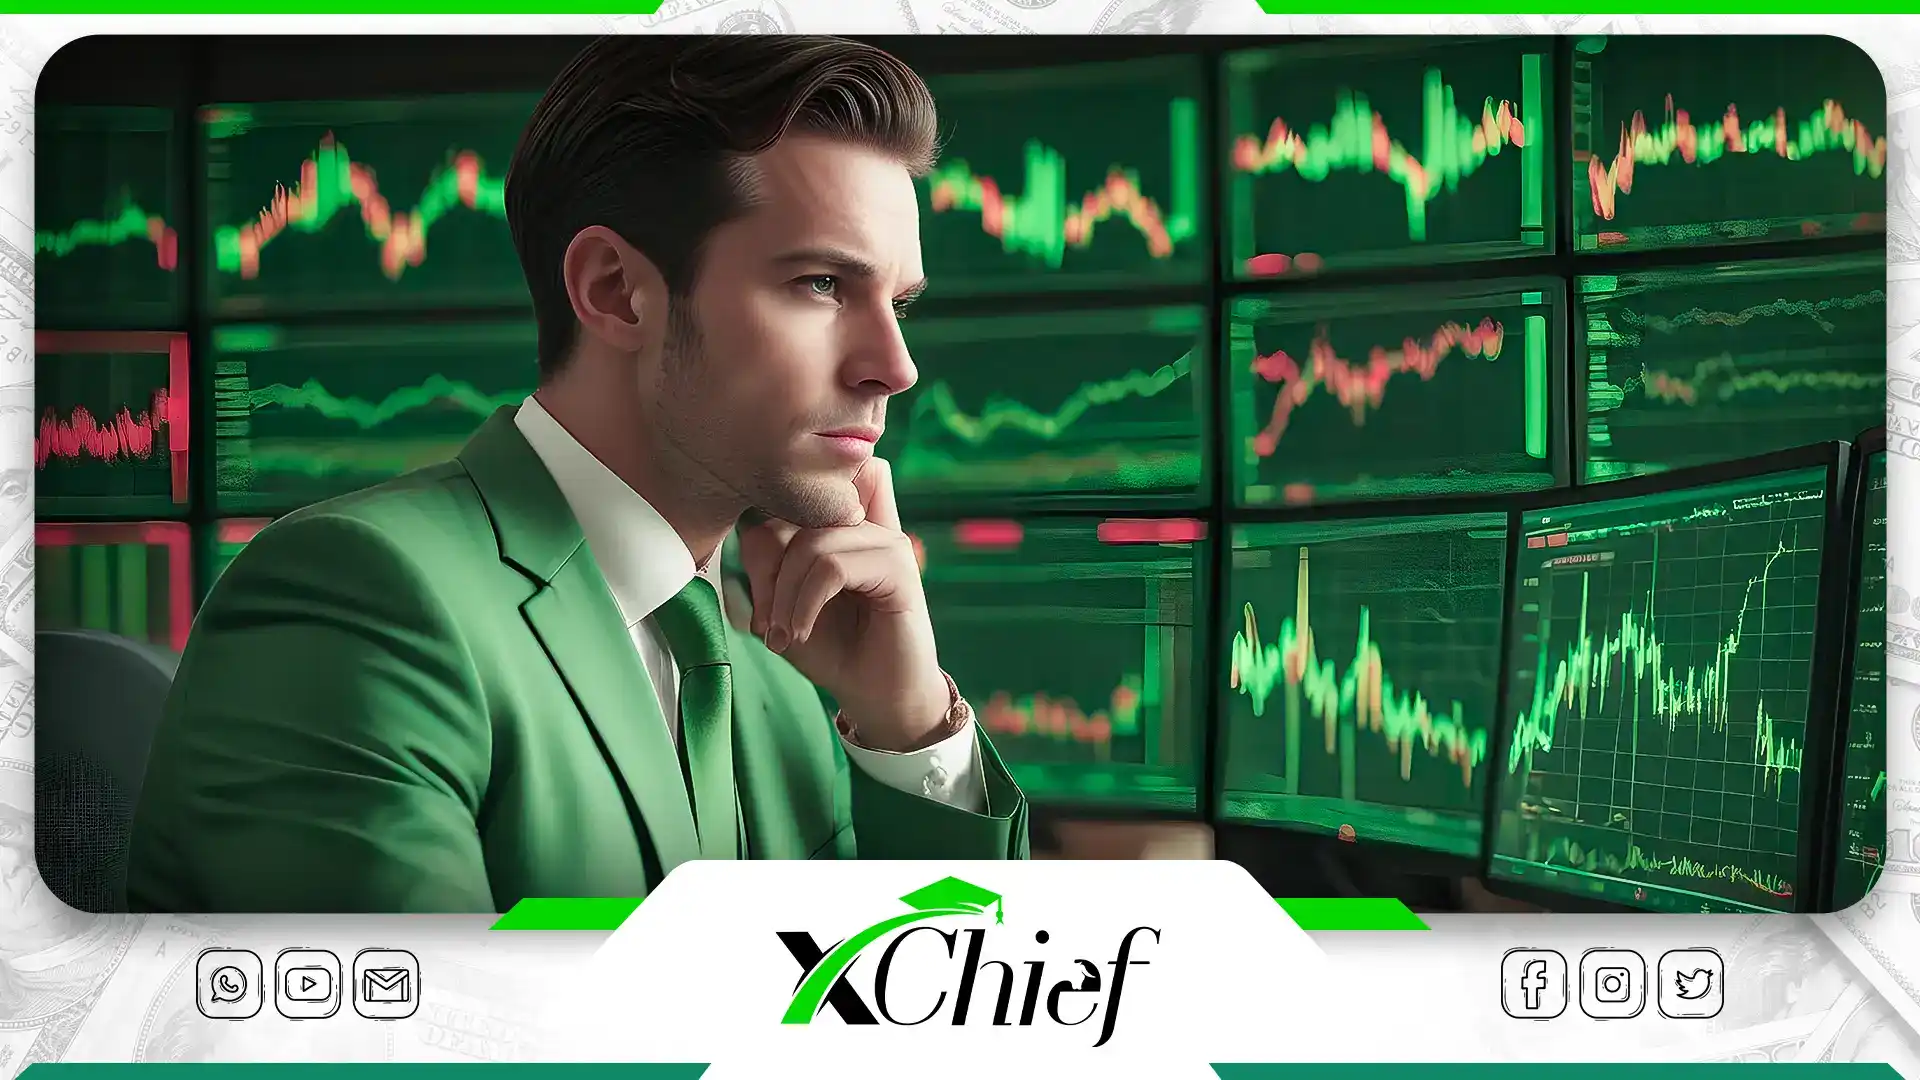 What is the forex economic calendar and how can it be used?